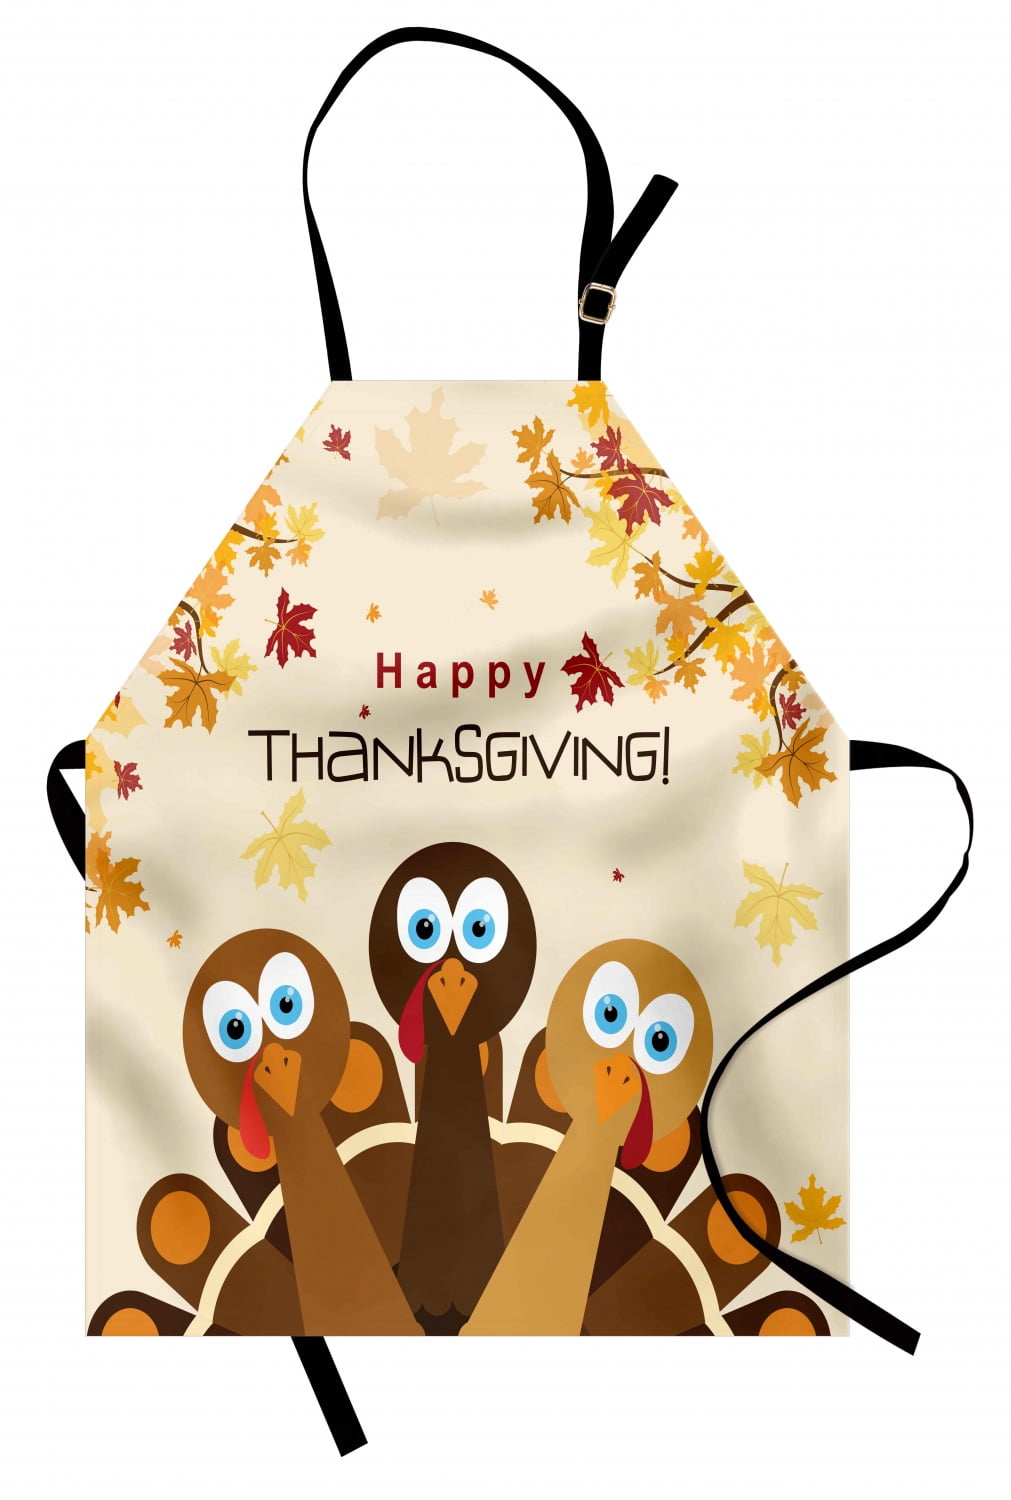 Claswcalor Thanksgiving Apron Turkey Apron Autumn Harvest Cooking Apron Fruit Corn Pumpkin Maple Leaves Baking Apron Waterproof Adjustable Apron for Holiday Party Gift 